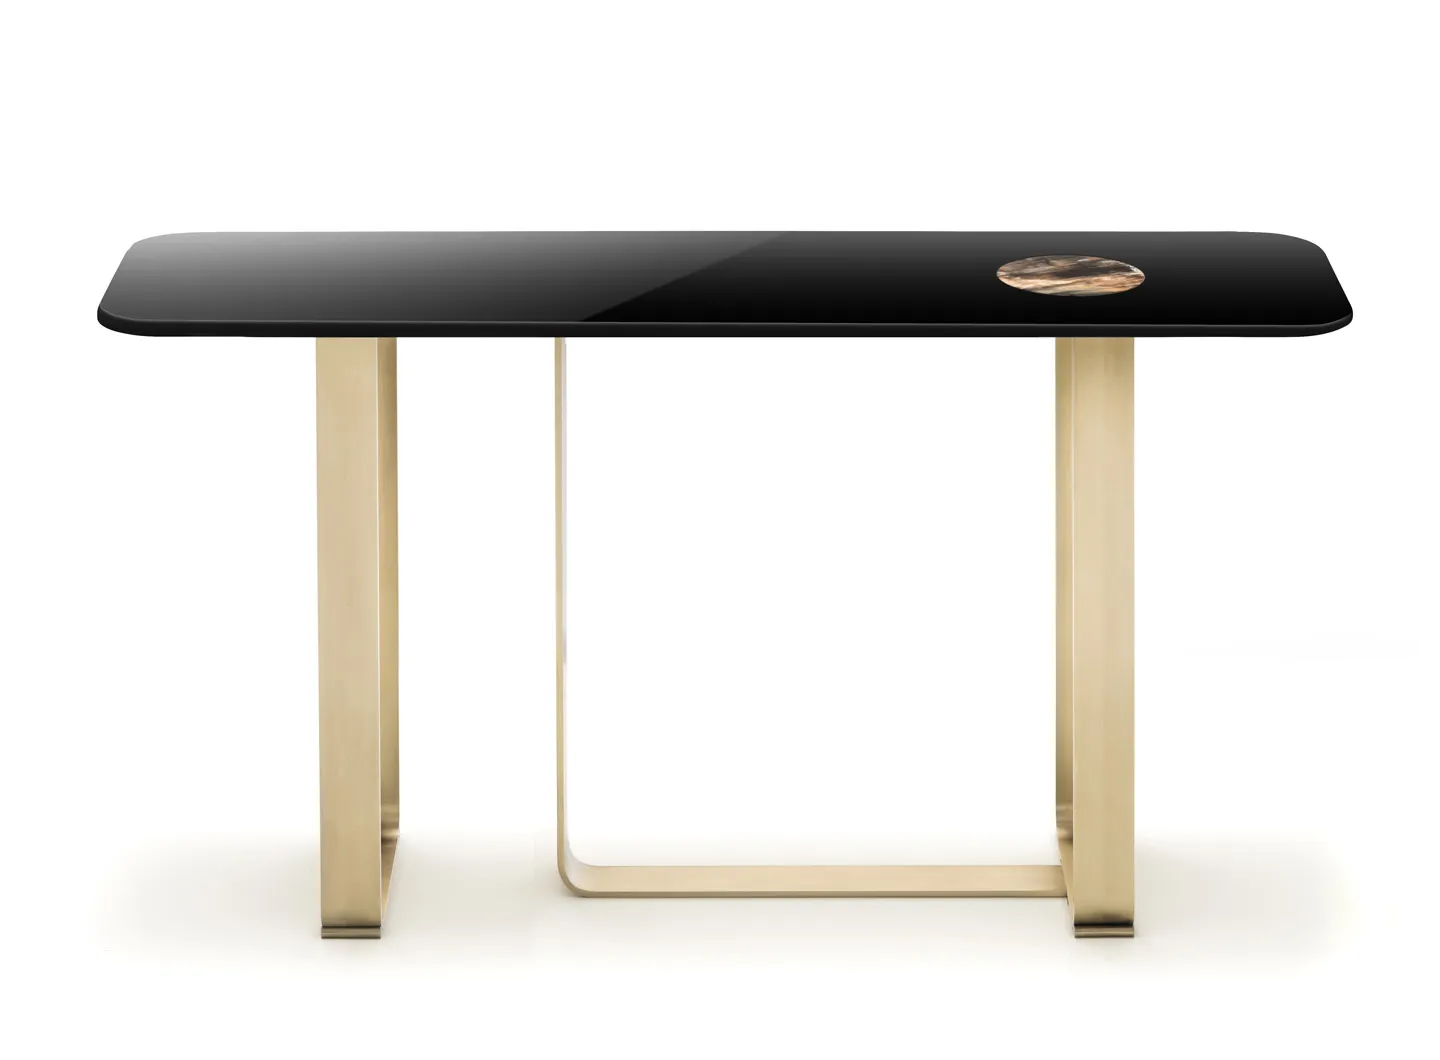 Arcahorn - Minerva console table in black lacquer